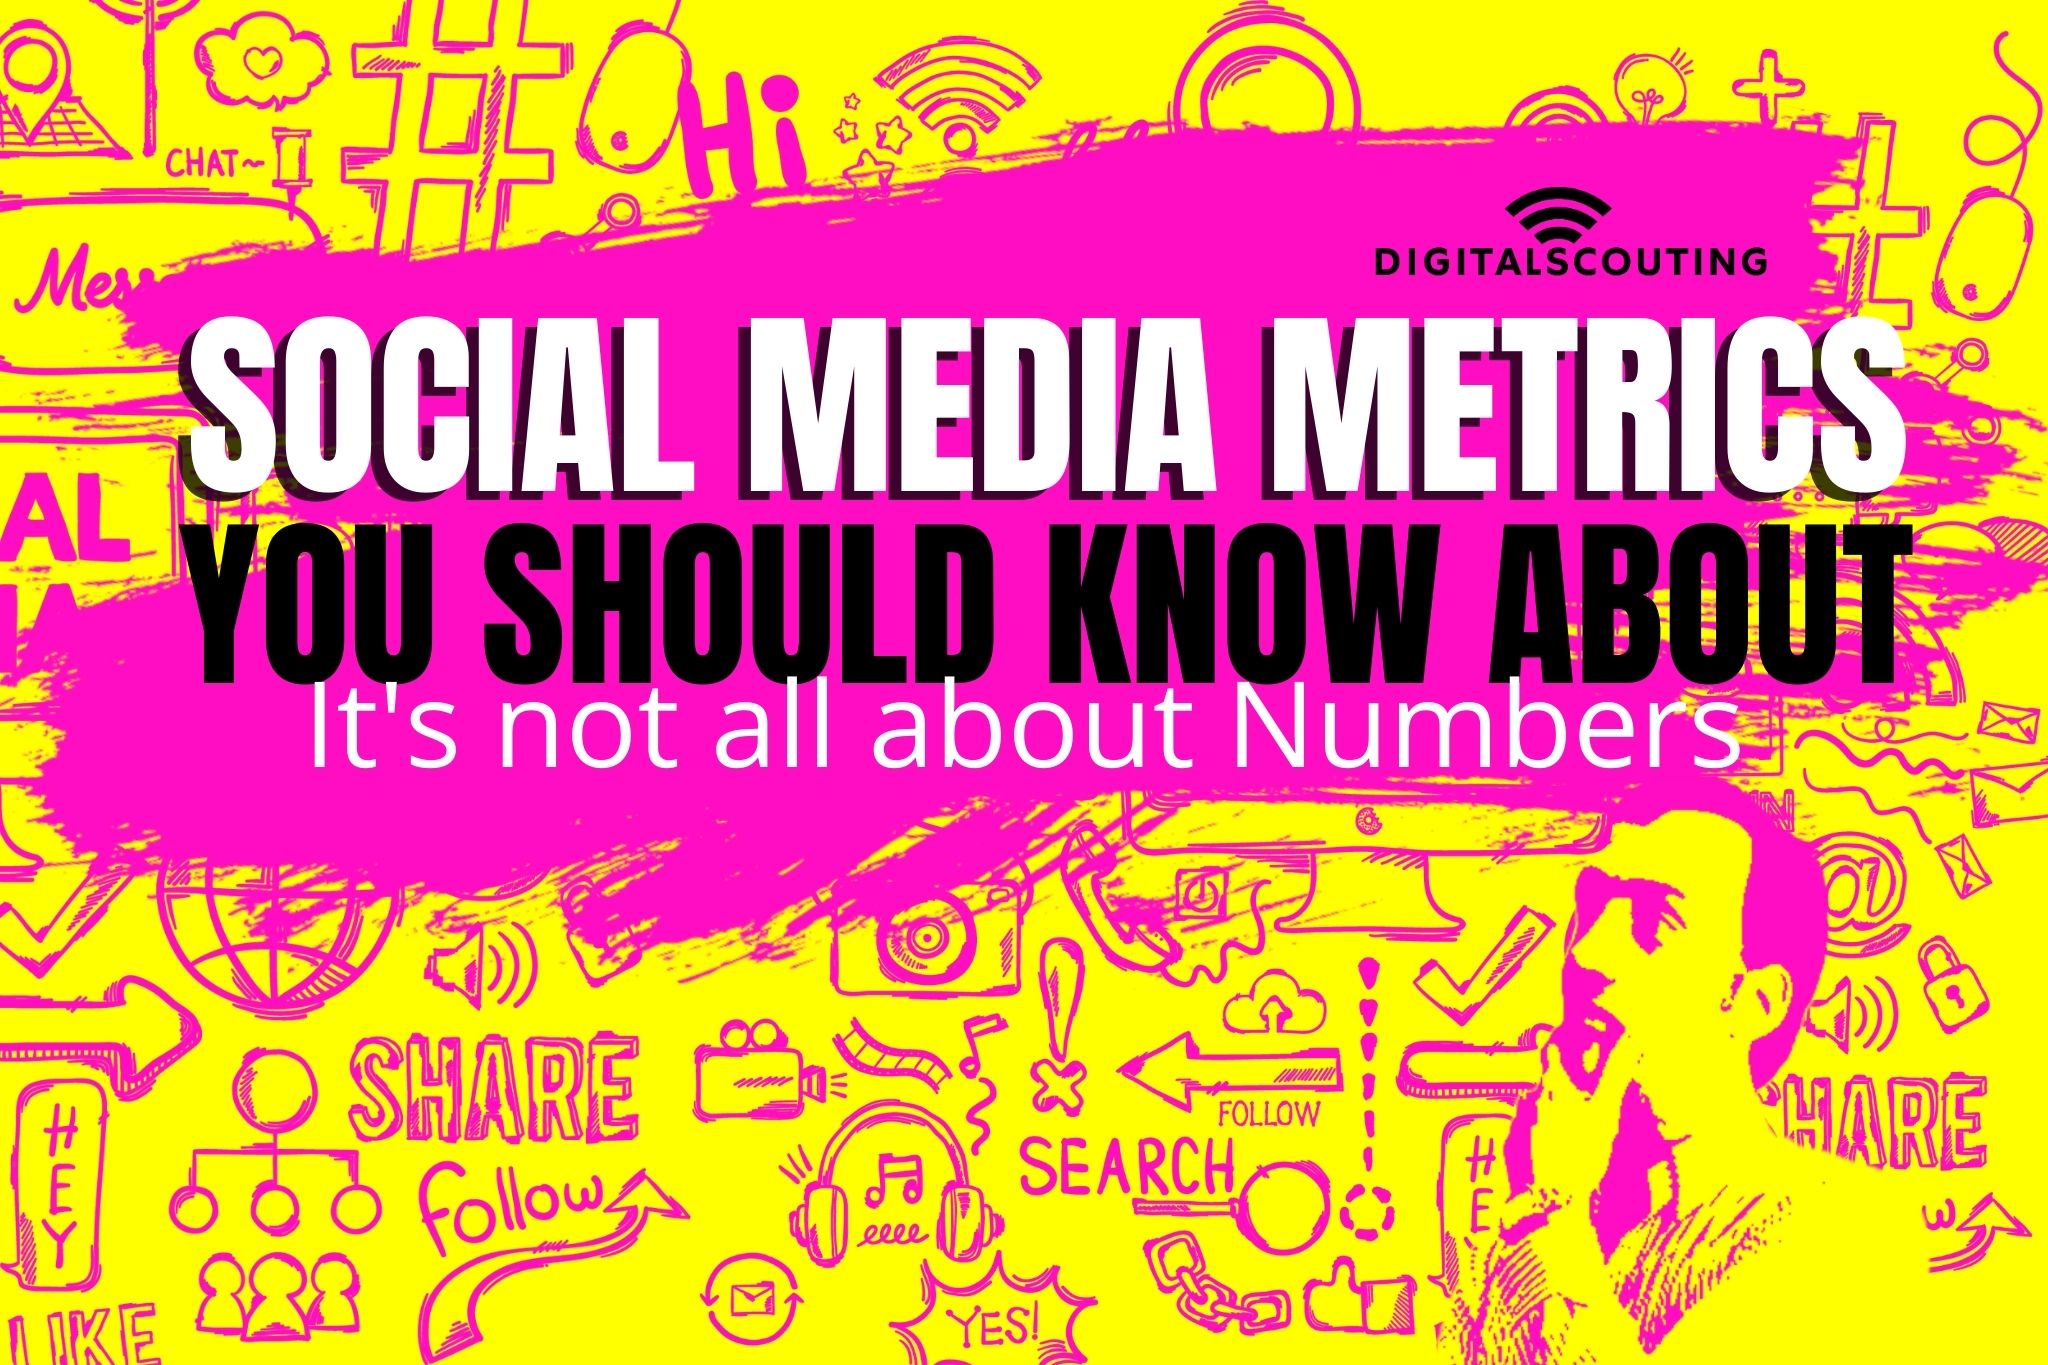 Social Media Metrics You Should Know About.